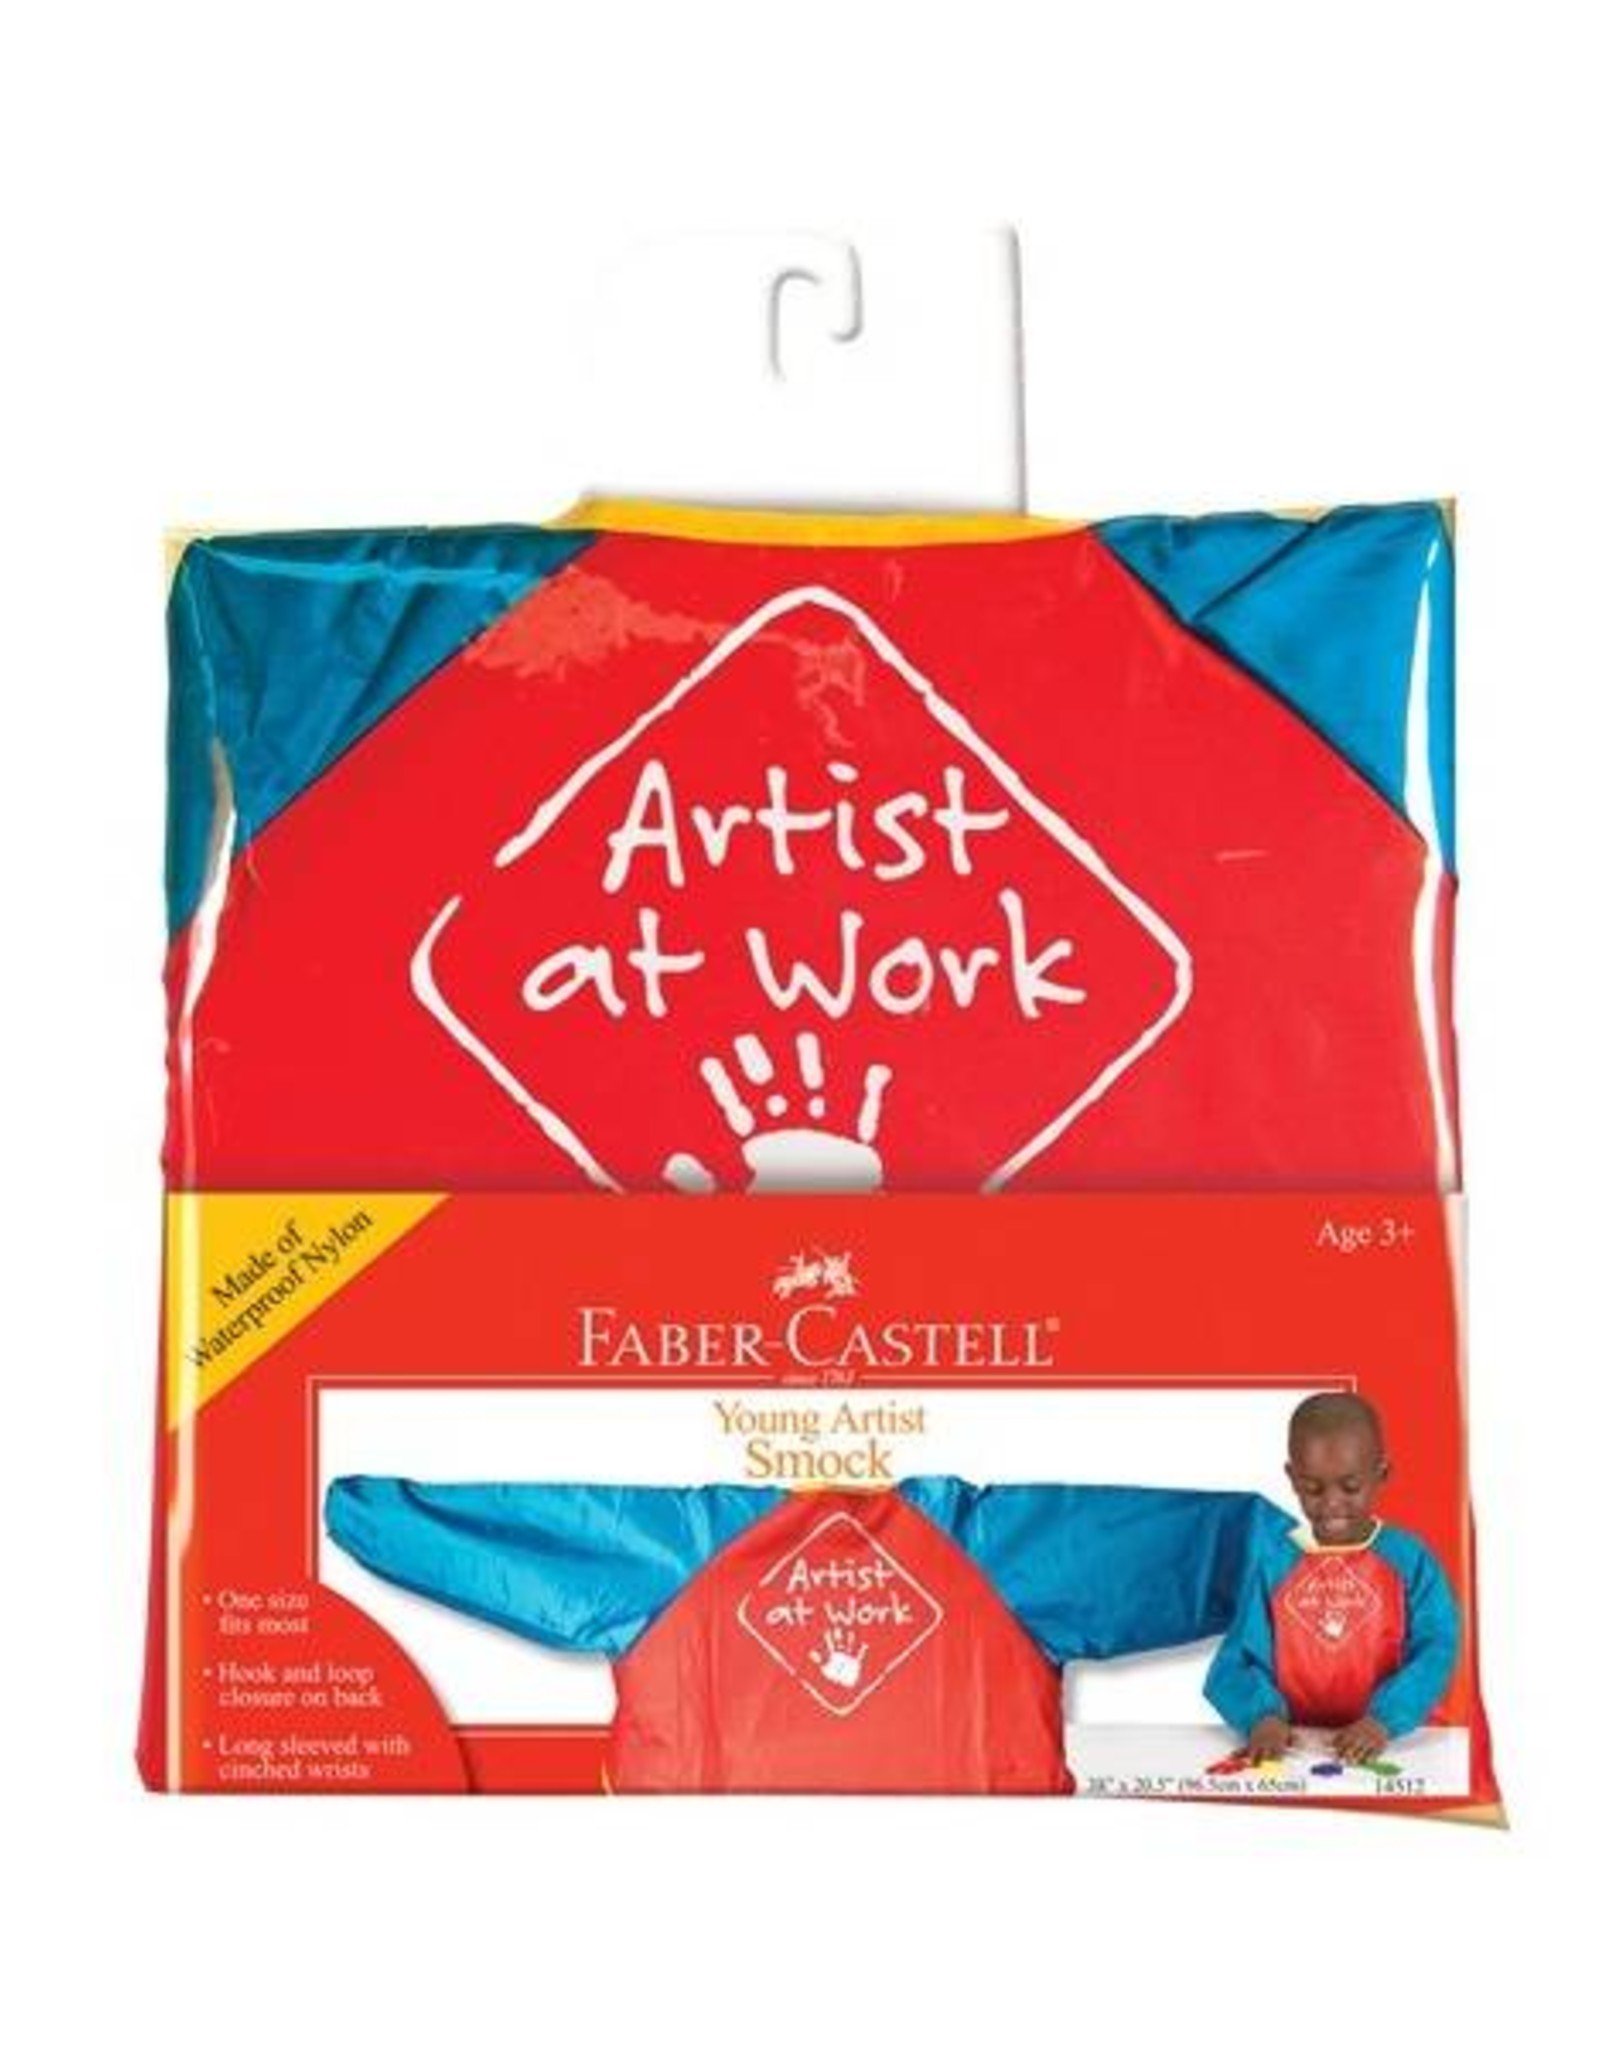 Faber Castell Young Artist Smock